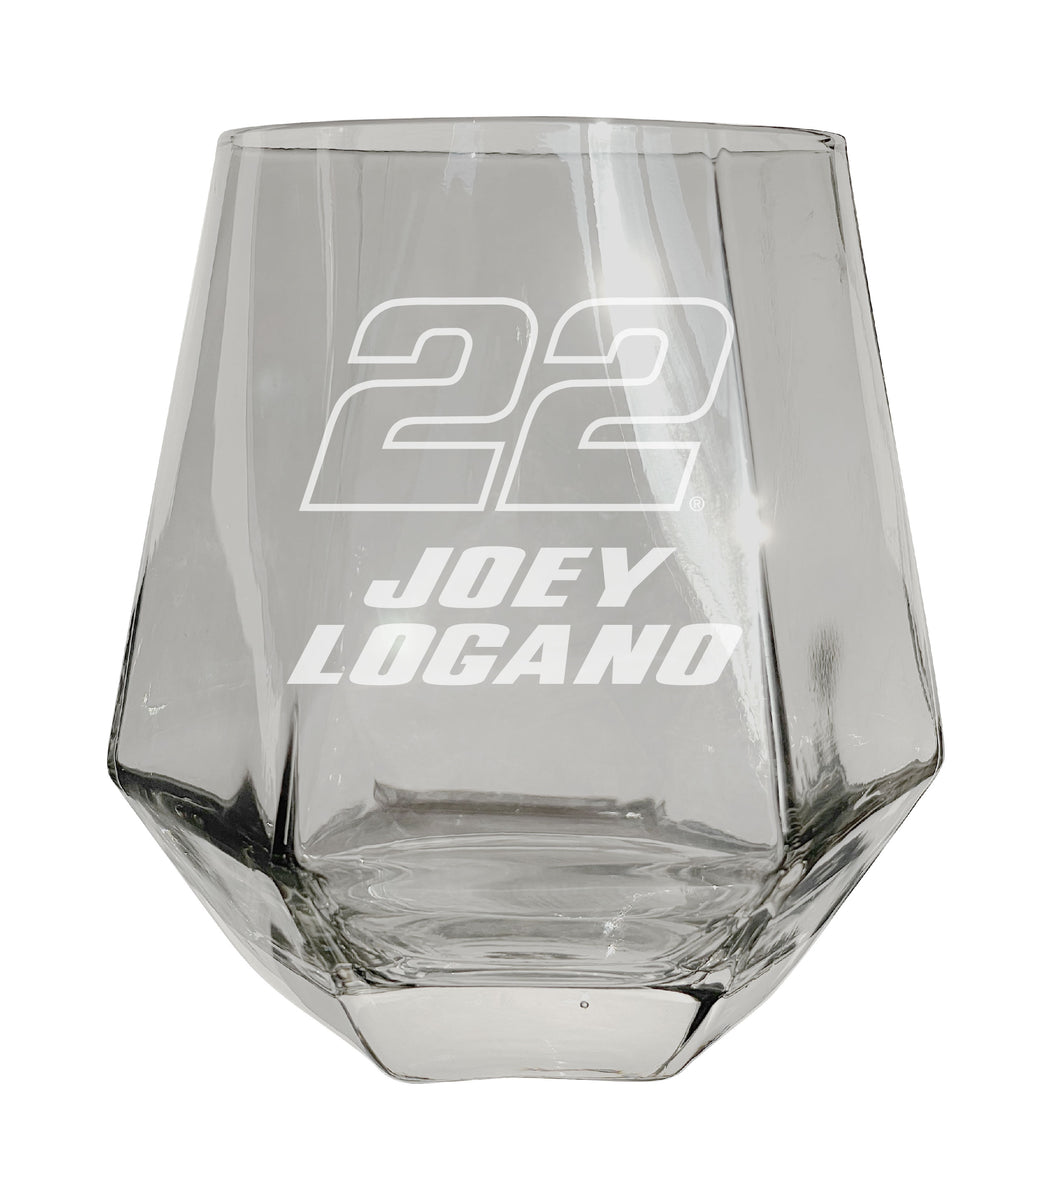 #22 Joey Logano Officially Licensed 10 oz Engraved Diamond Wine Glass